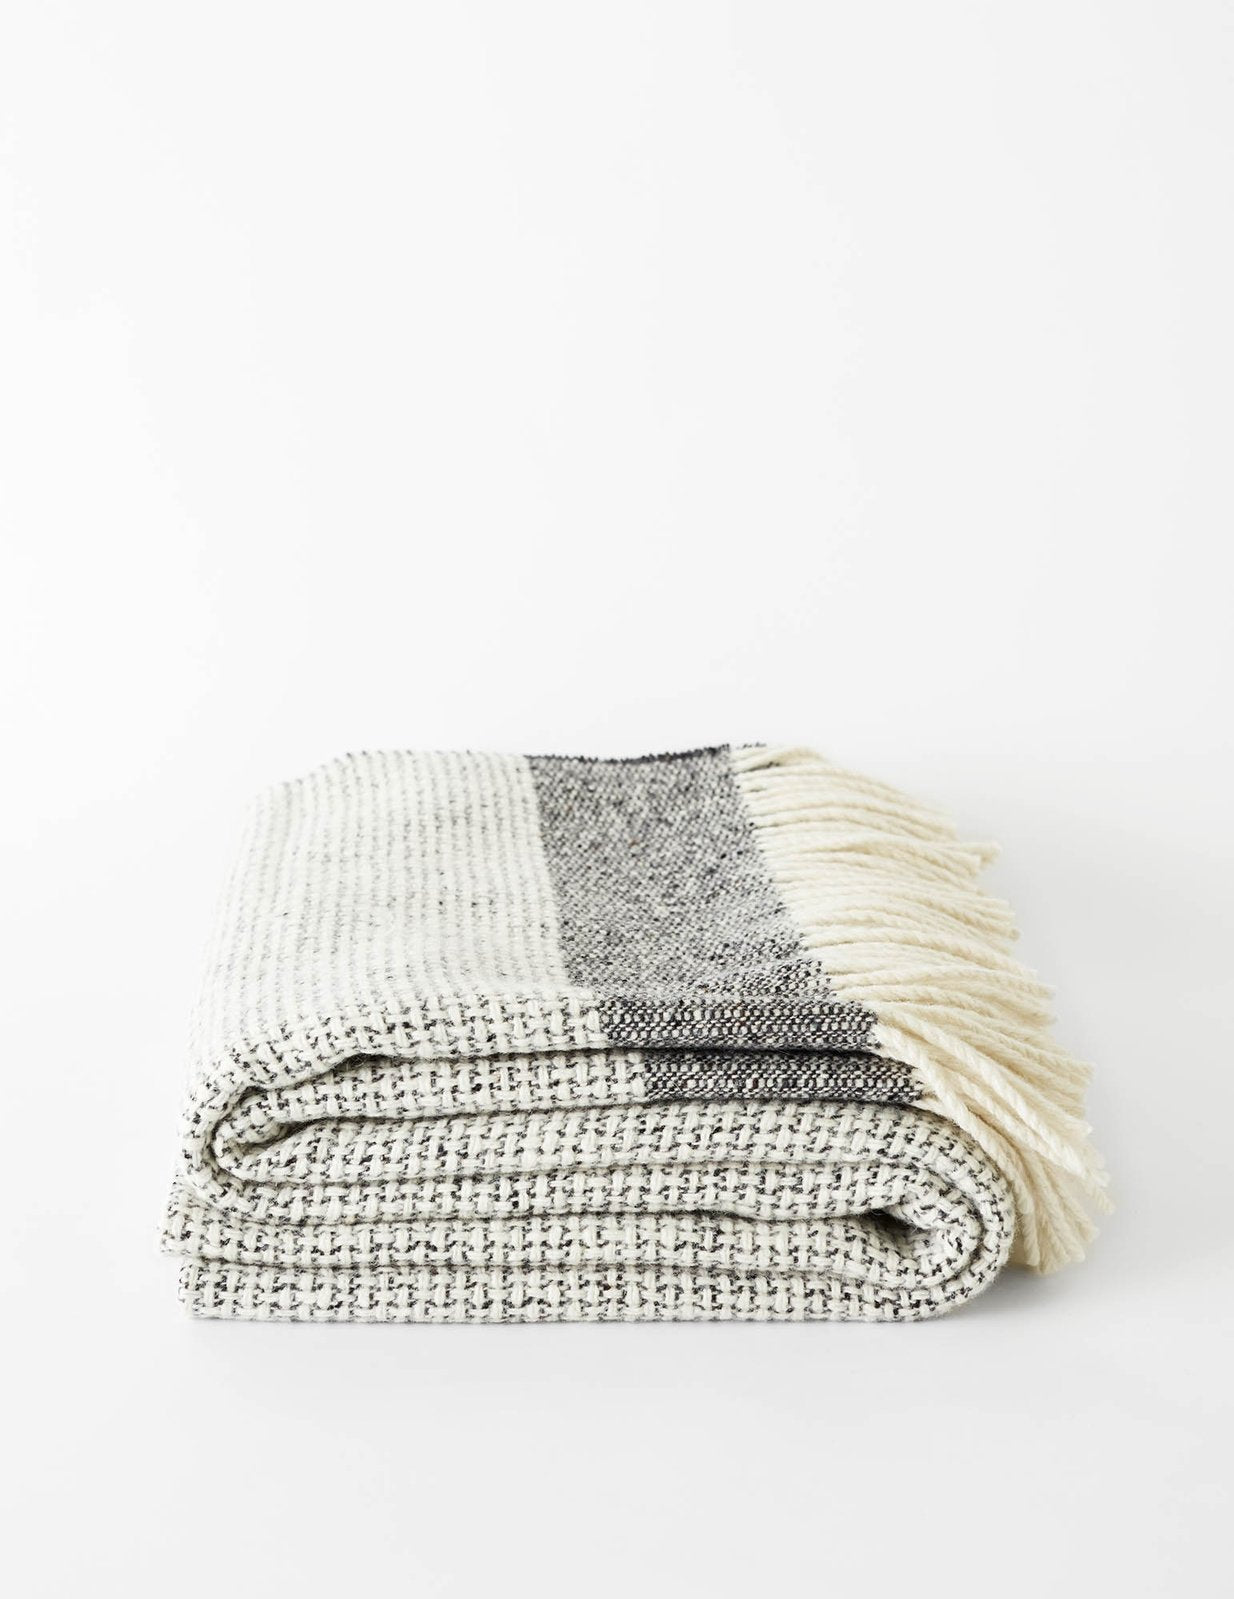 Mended Tweed Large Bed Throw - Charcoal Grey with band